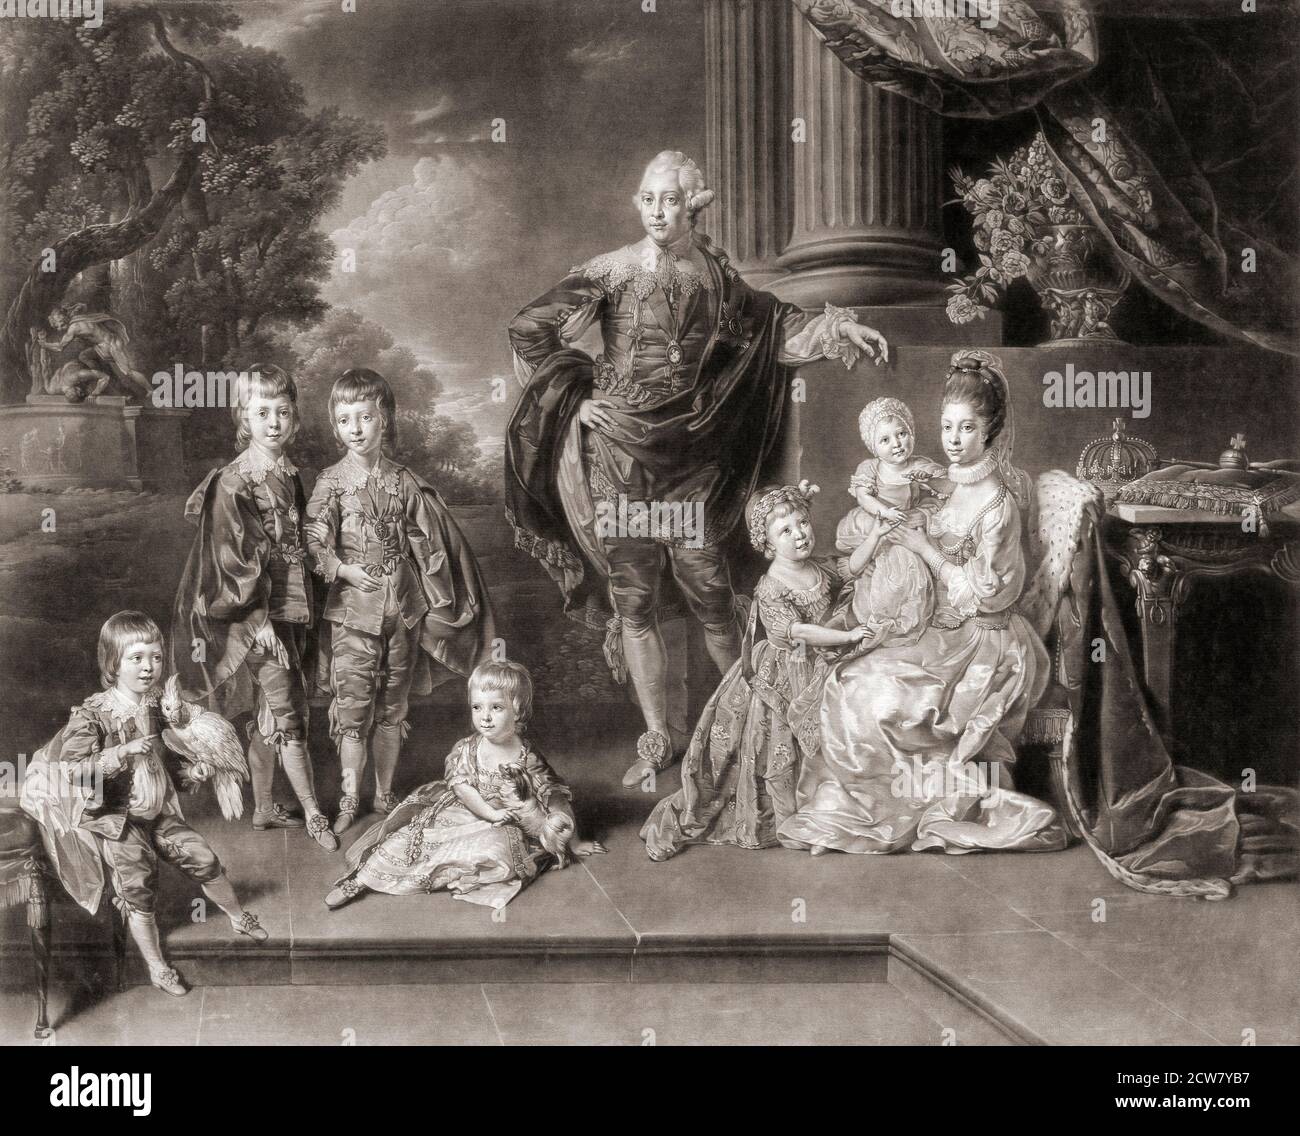 Portrait of King George III of England, his wife Queen Charlotte and their family in 1770.   On the far left, Prince William (holding a parrot) future King William IV of England, Prince George future King George IV of England, Prince Frederick, Prince Edward (seated on floor with dog), King George III, Princess Charlotte Augusta and Princess Sophia in the arms of her mother Queen Charlotte.  After an engraving by Richard Earlom from a painting by German artist  Johann Zoffany. Stock Photo